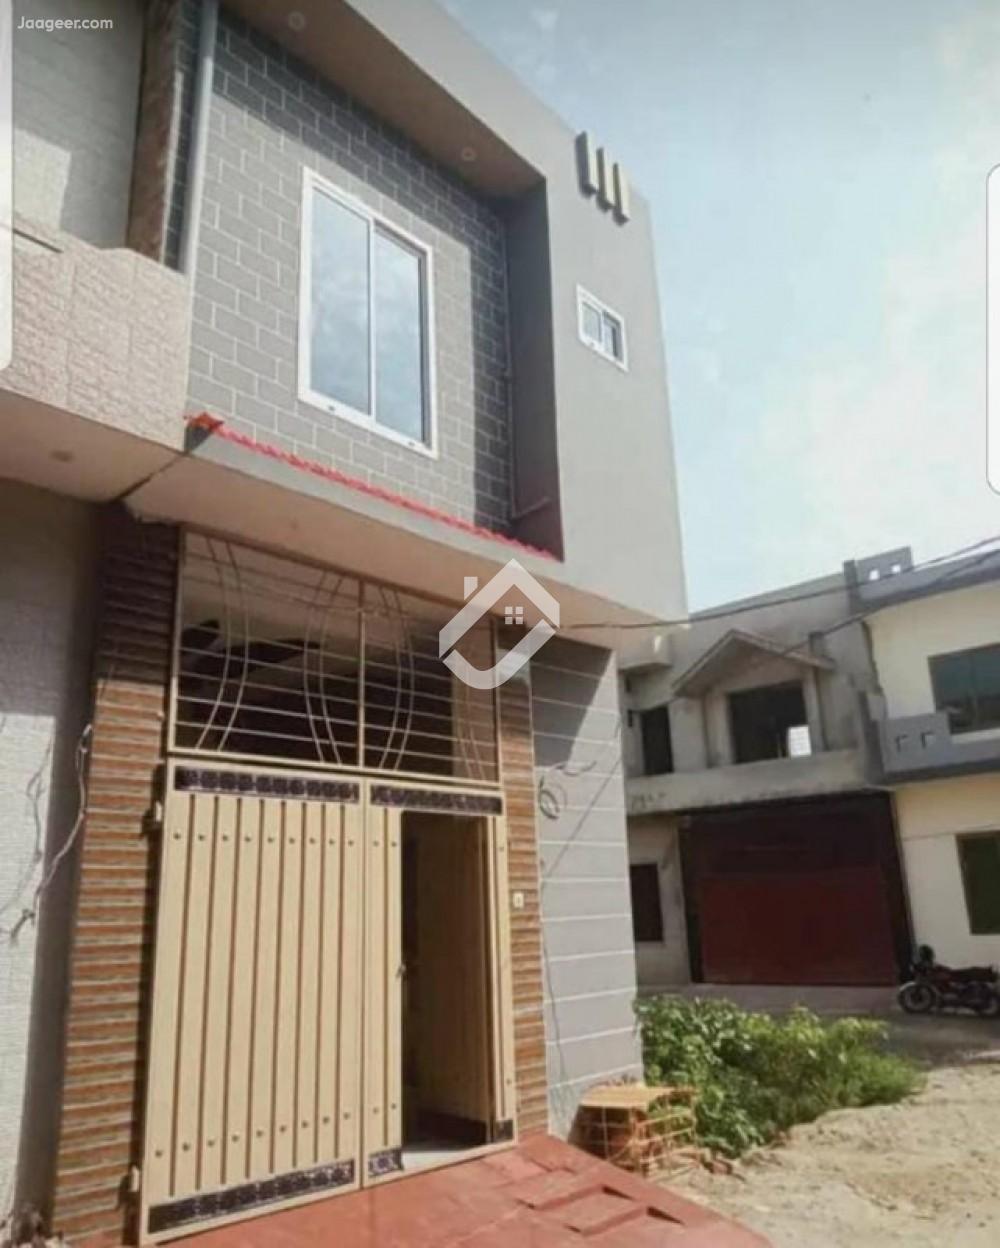 View  2 Marla Double Storey House For Sale At Faisalabad Road in Faisalabad Road, Sargodha